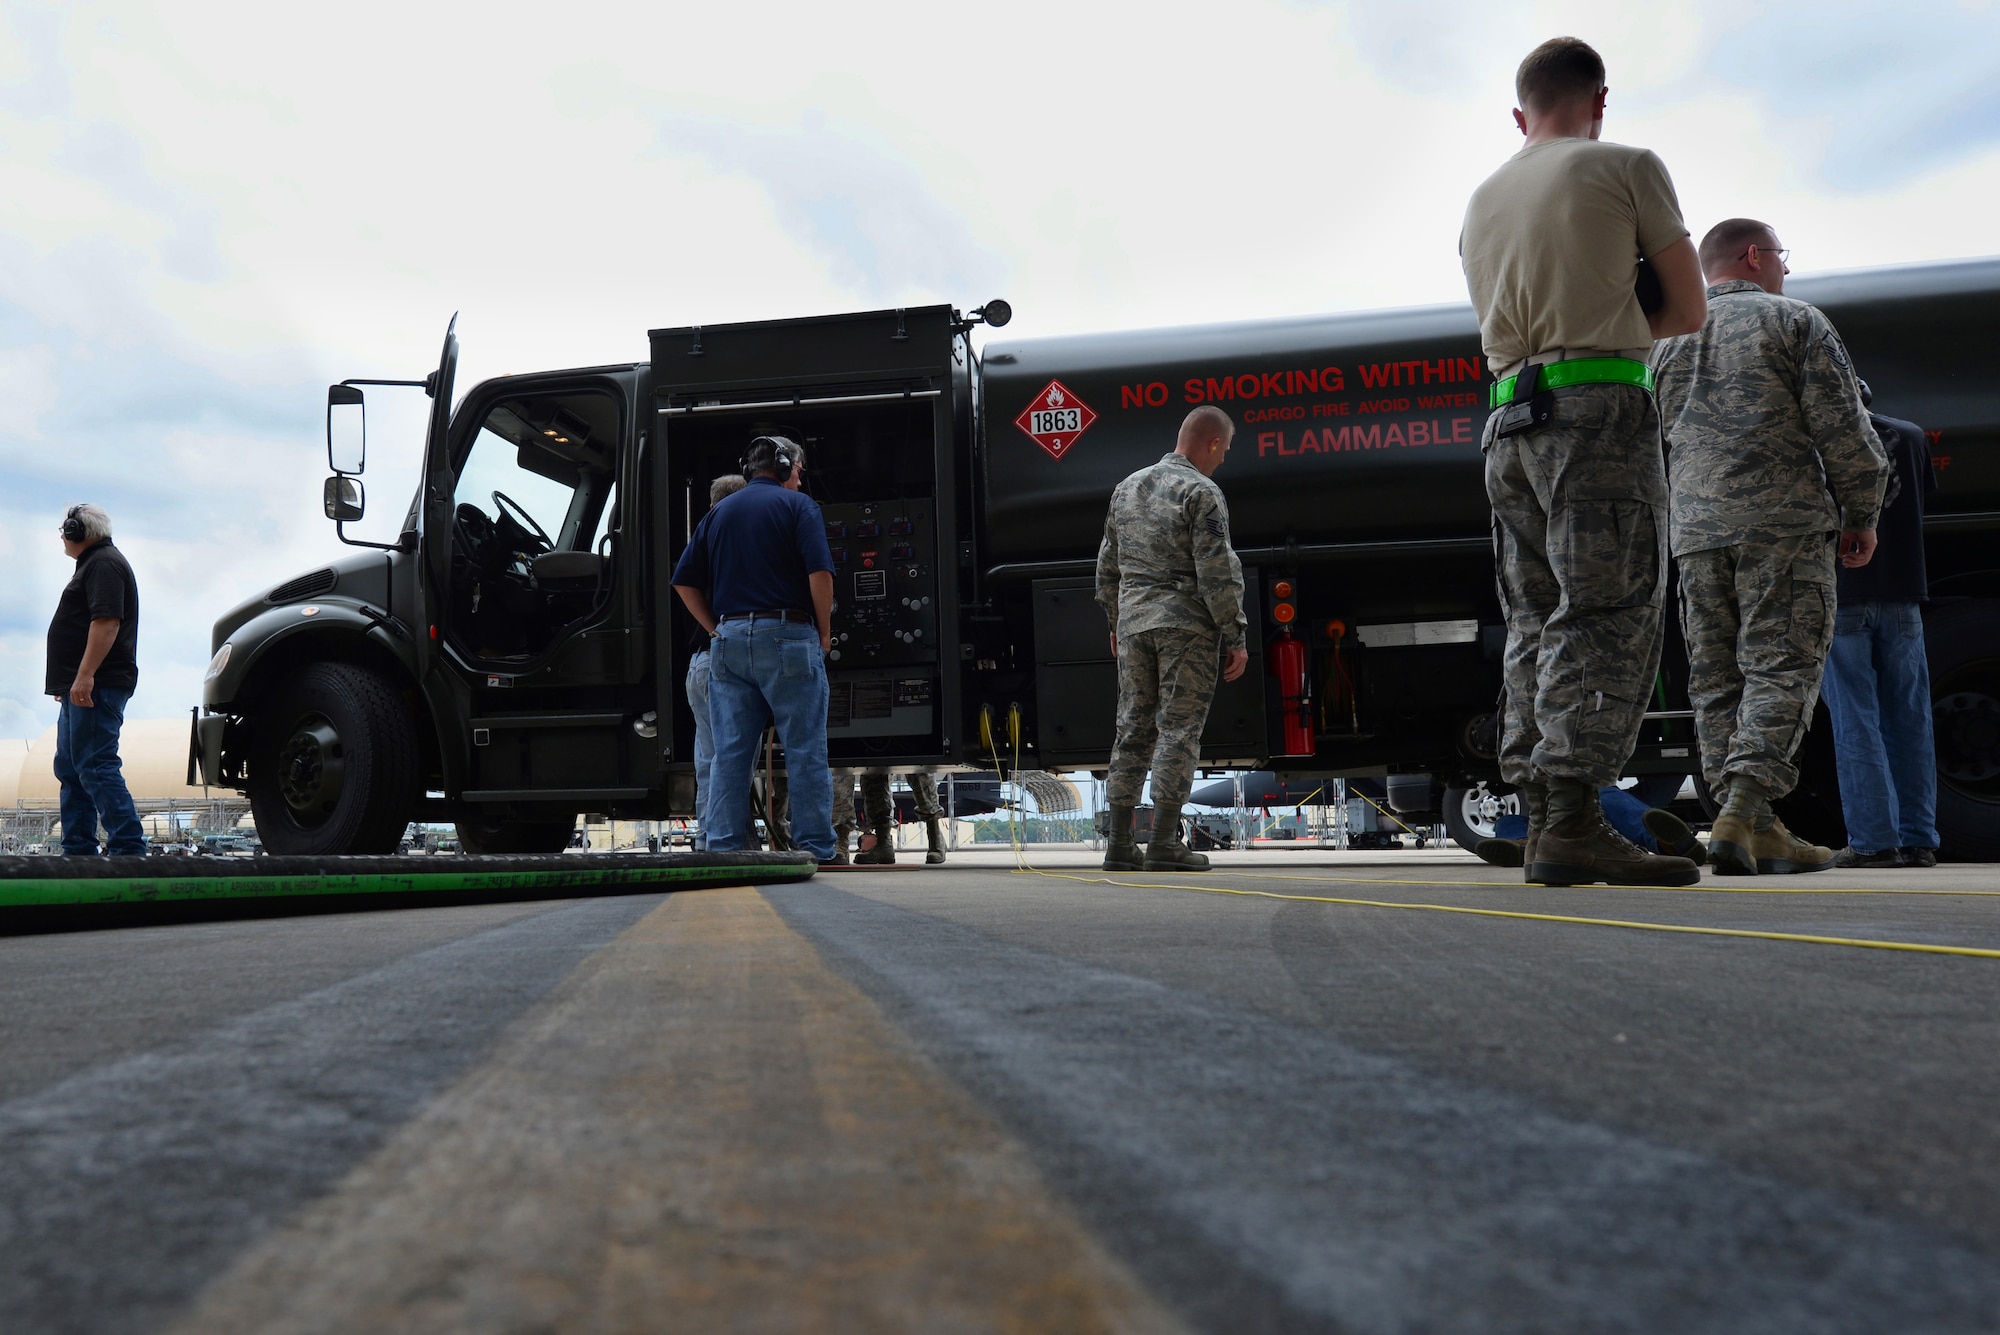 The Isometrics R-11 Refueler team tests the truck’s revolutions per minute and fuel consumption, May 17, 2016, at Seymour Johnson Air Force Base, North Carolina. Seymour Johnson AFB was chosen as a test facility to determine adjustments before distribution to the military. (U.S. Air Force photo by Airman 1st Class Ashley Williamson)